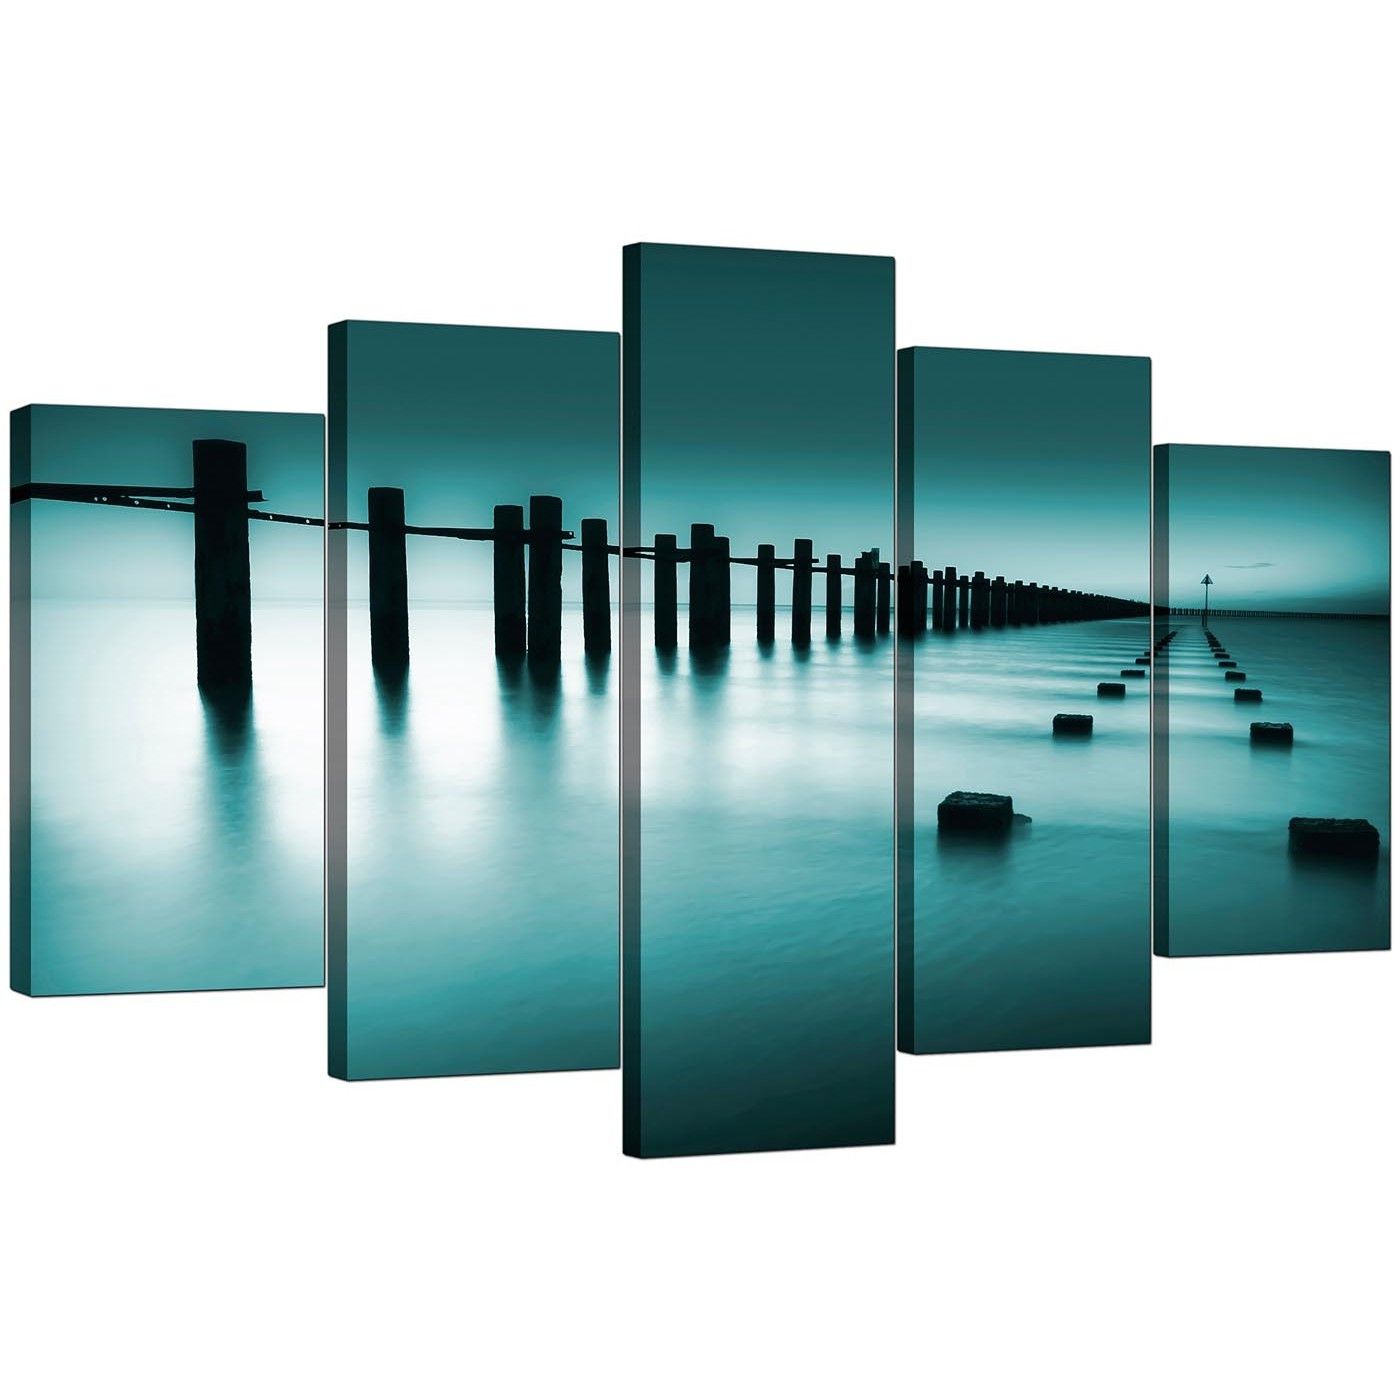 Extra Large Sea Canvas Wall Art Five Panel In Teal Throughout Most Recently Released Extra Large Wall Art (View 17 of 20)